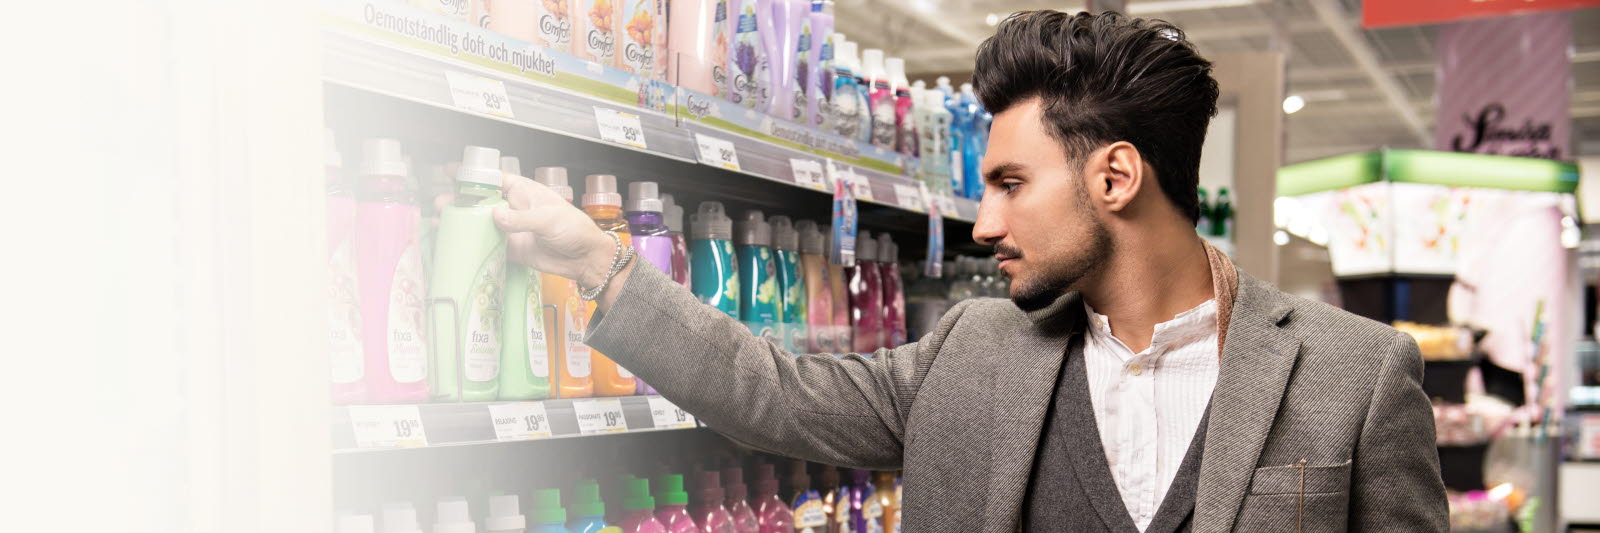 Man reaching for a product on a shelf